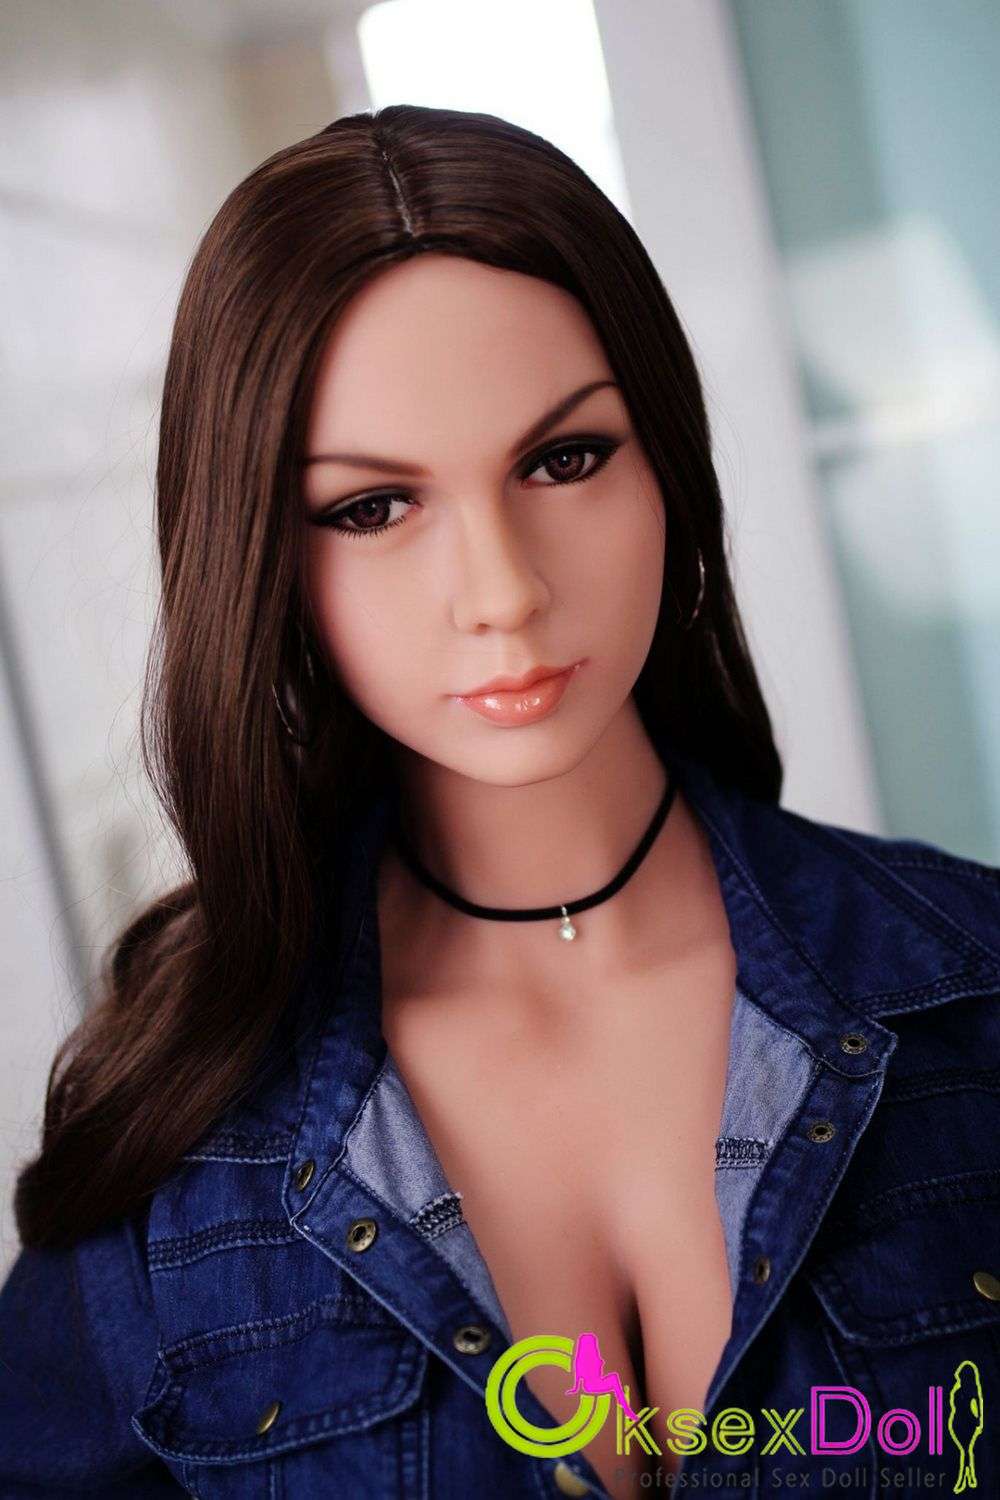 WM Doll images